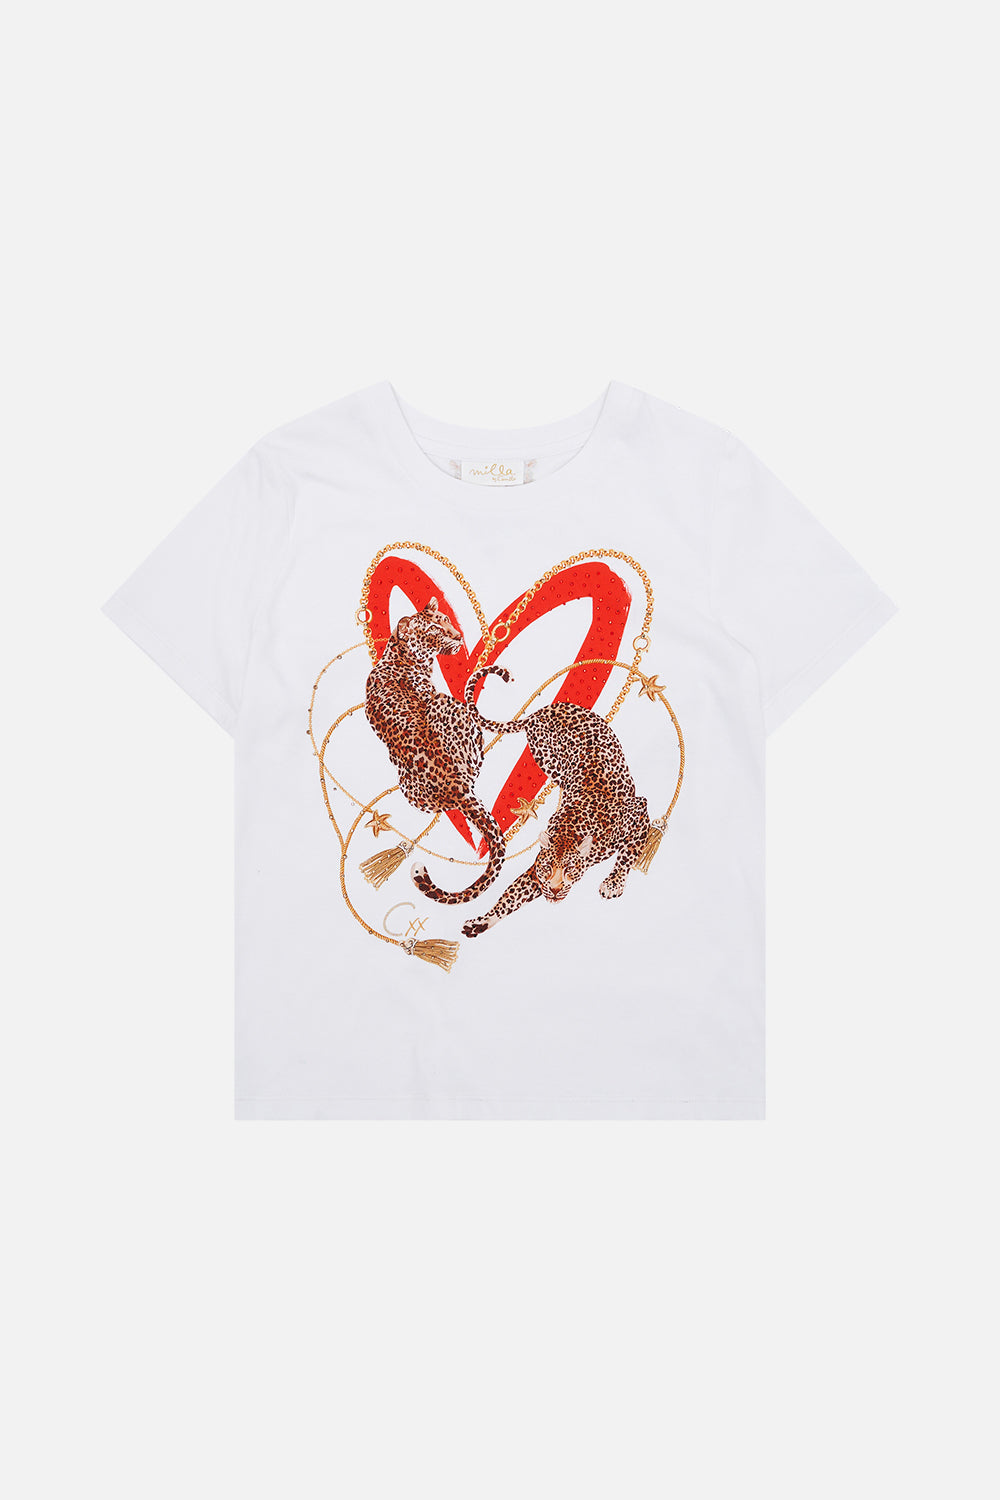 Product view of Milla By CAMILLA kids t shirt in Saluti Summertime  print